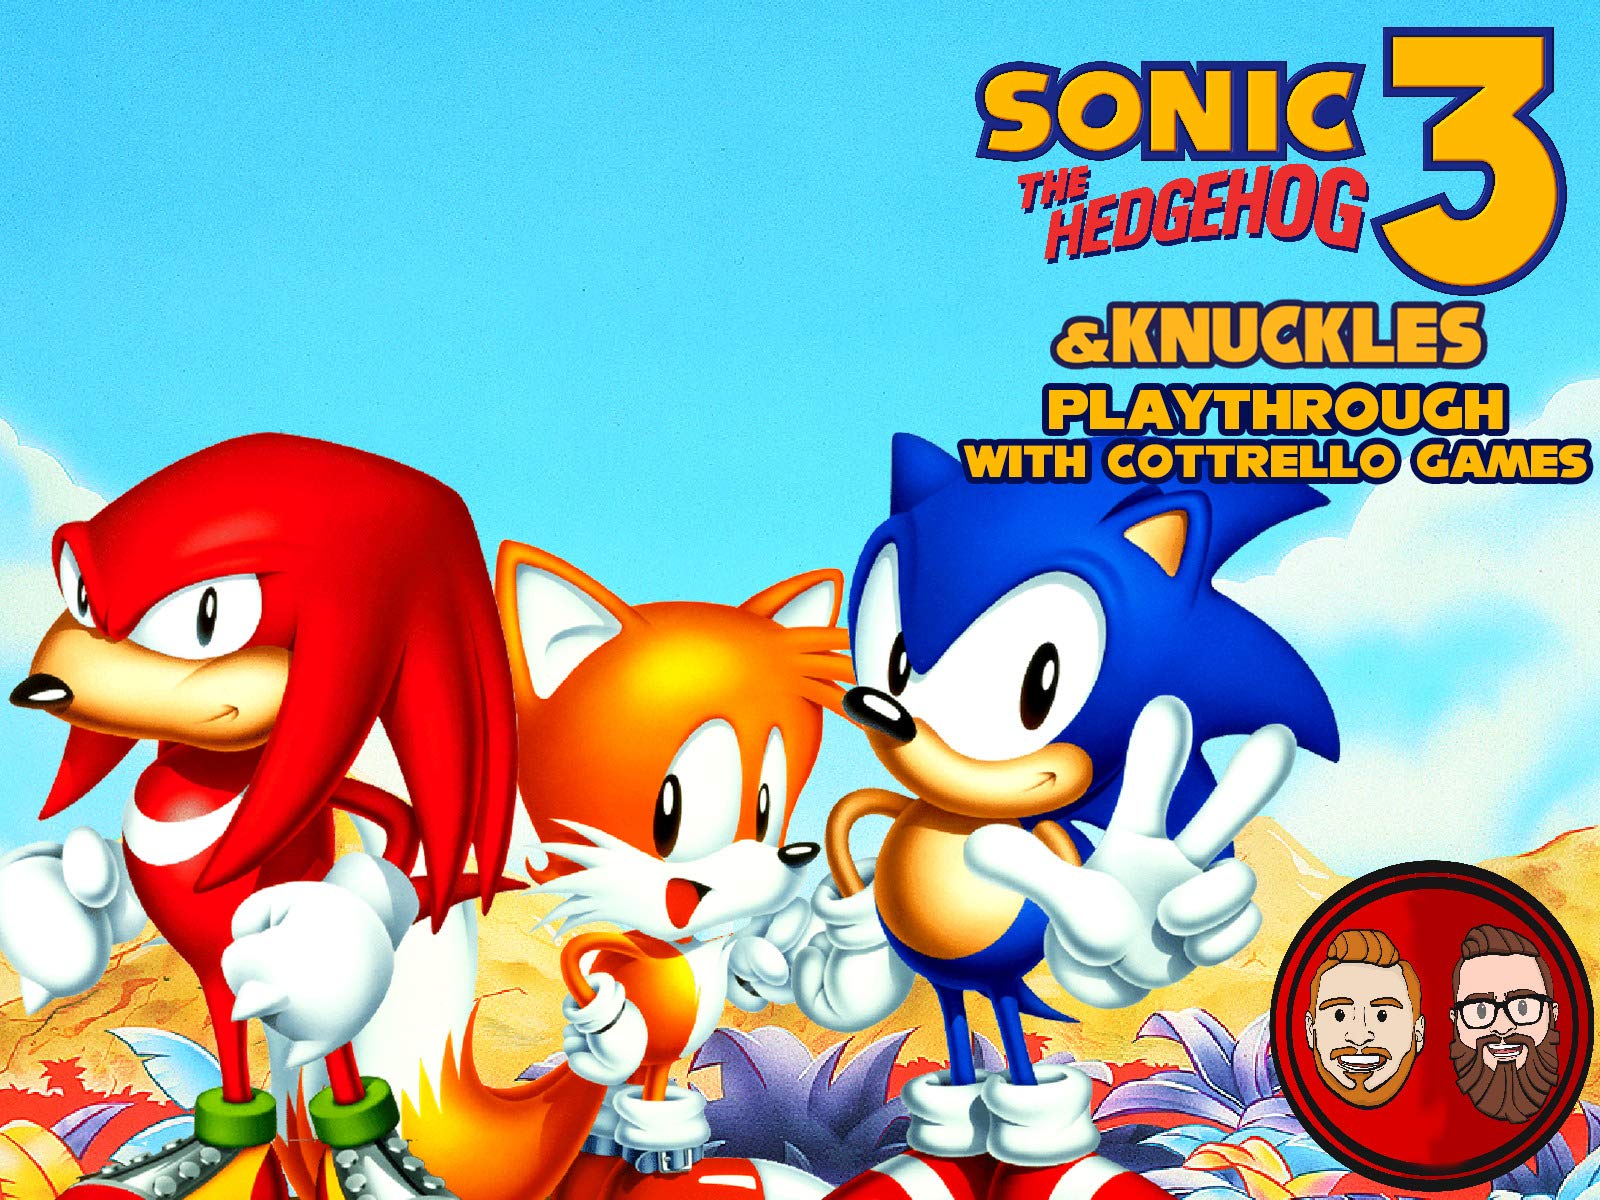 Watch Sonic the Hedgehog 3 & Knuckles Playthrough with Cottrello Games